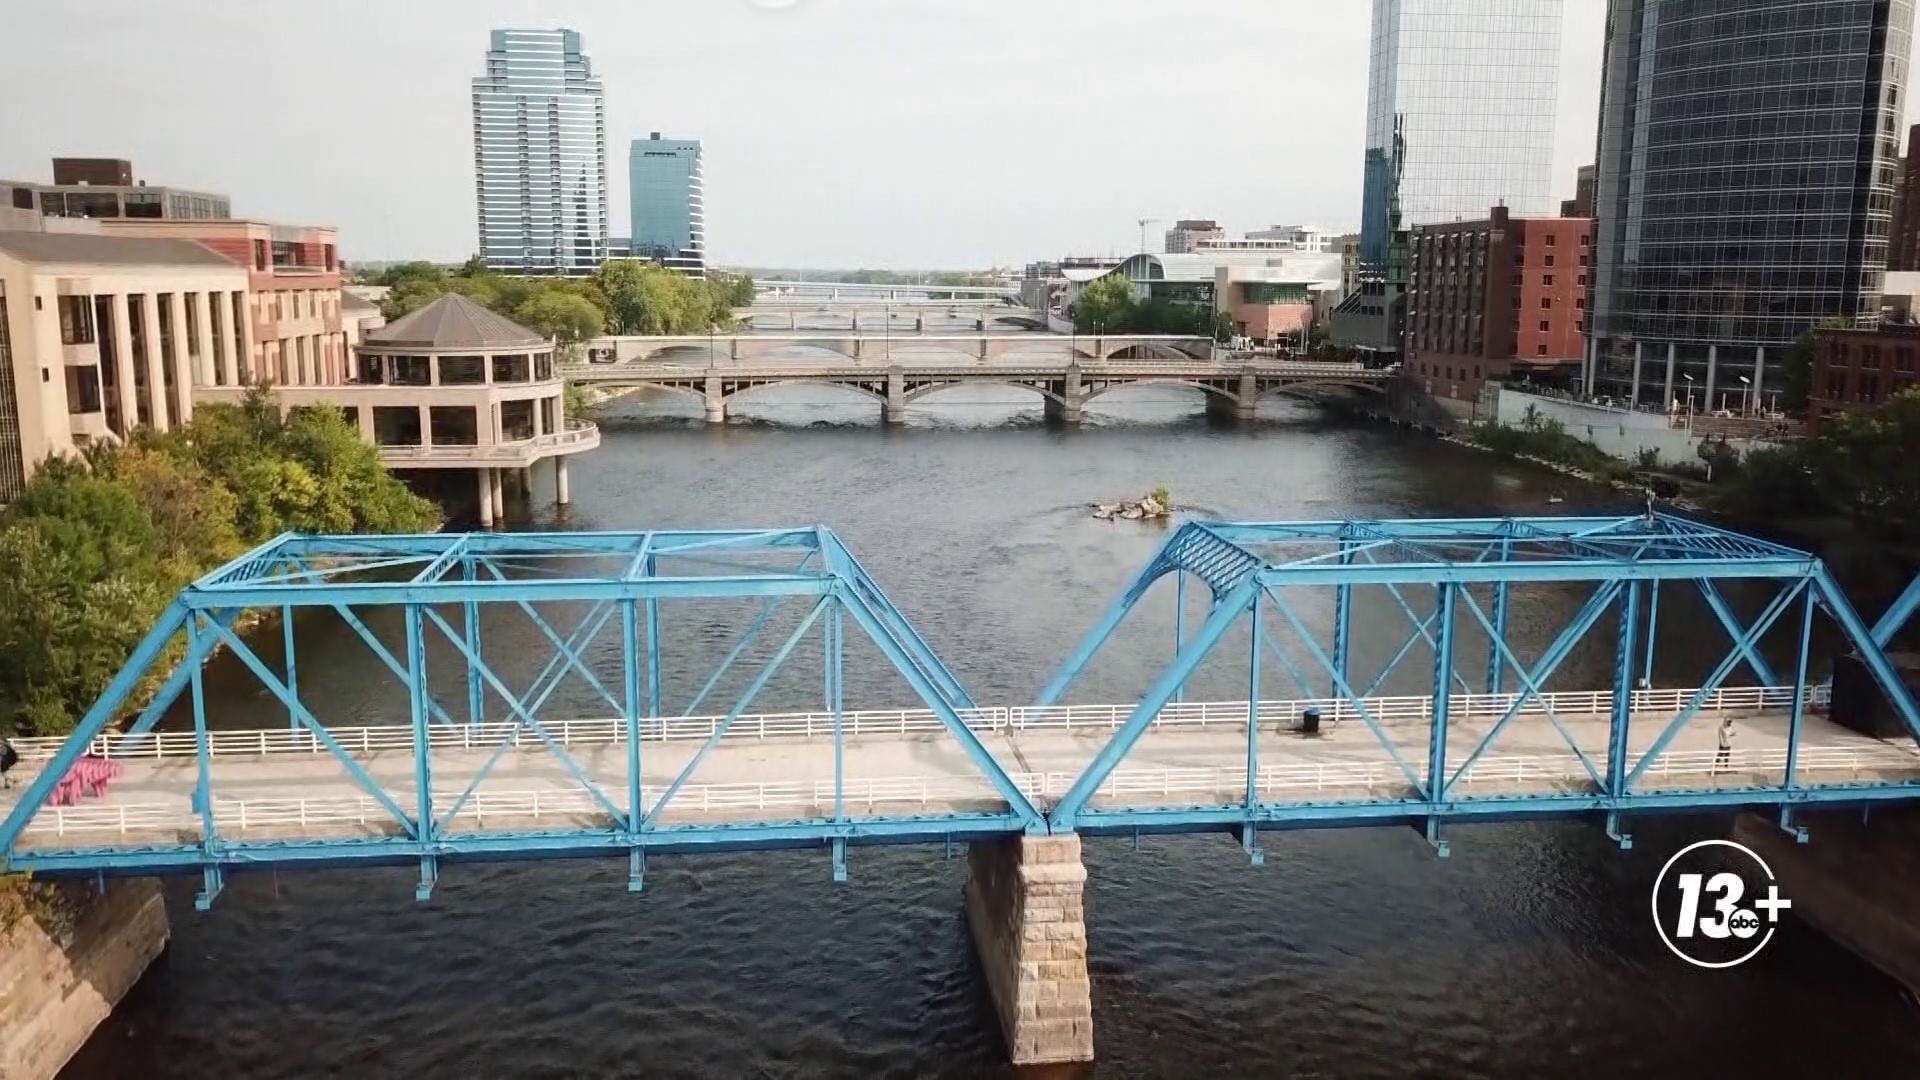 See the Greater Grand Rapids area like you've never seen it before! Complete with pop-up facts about the city and surrounding area.